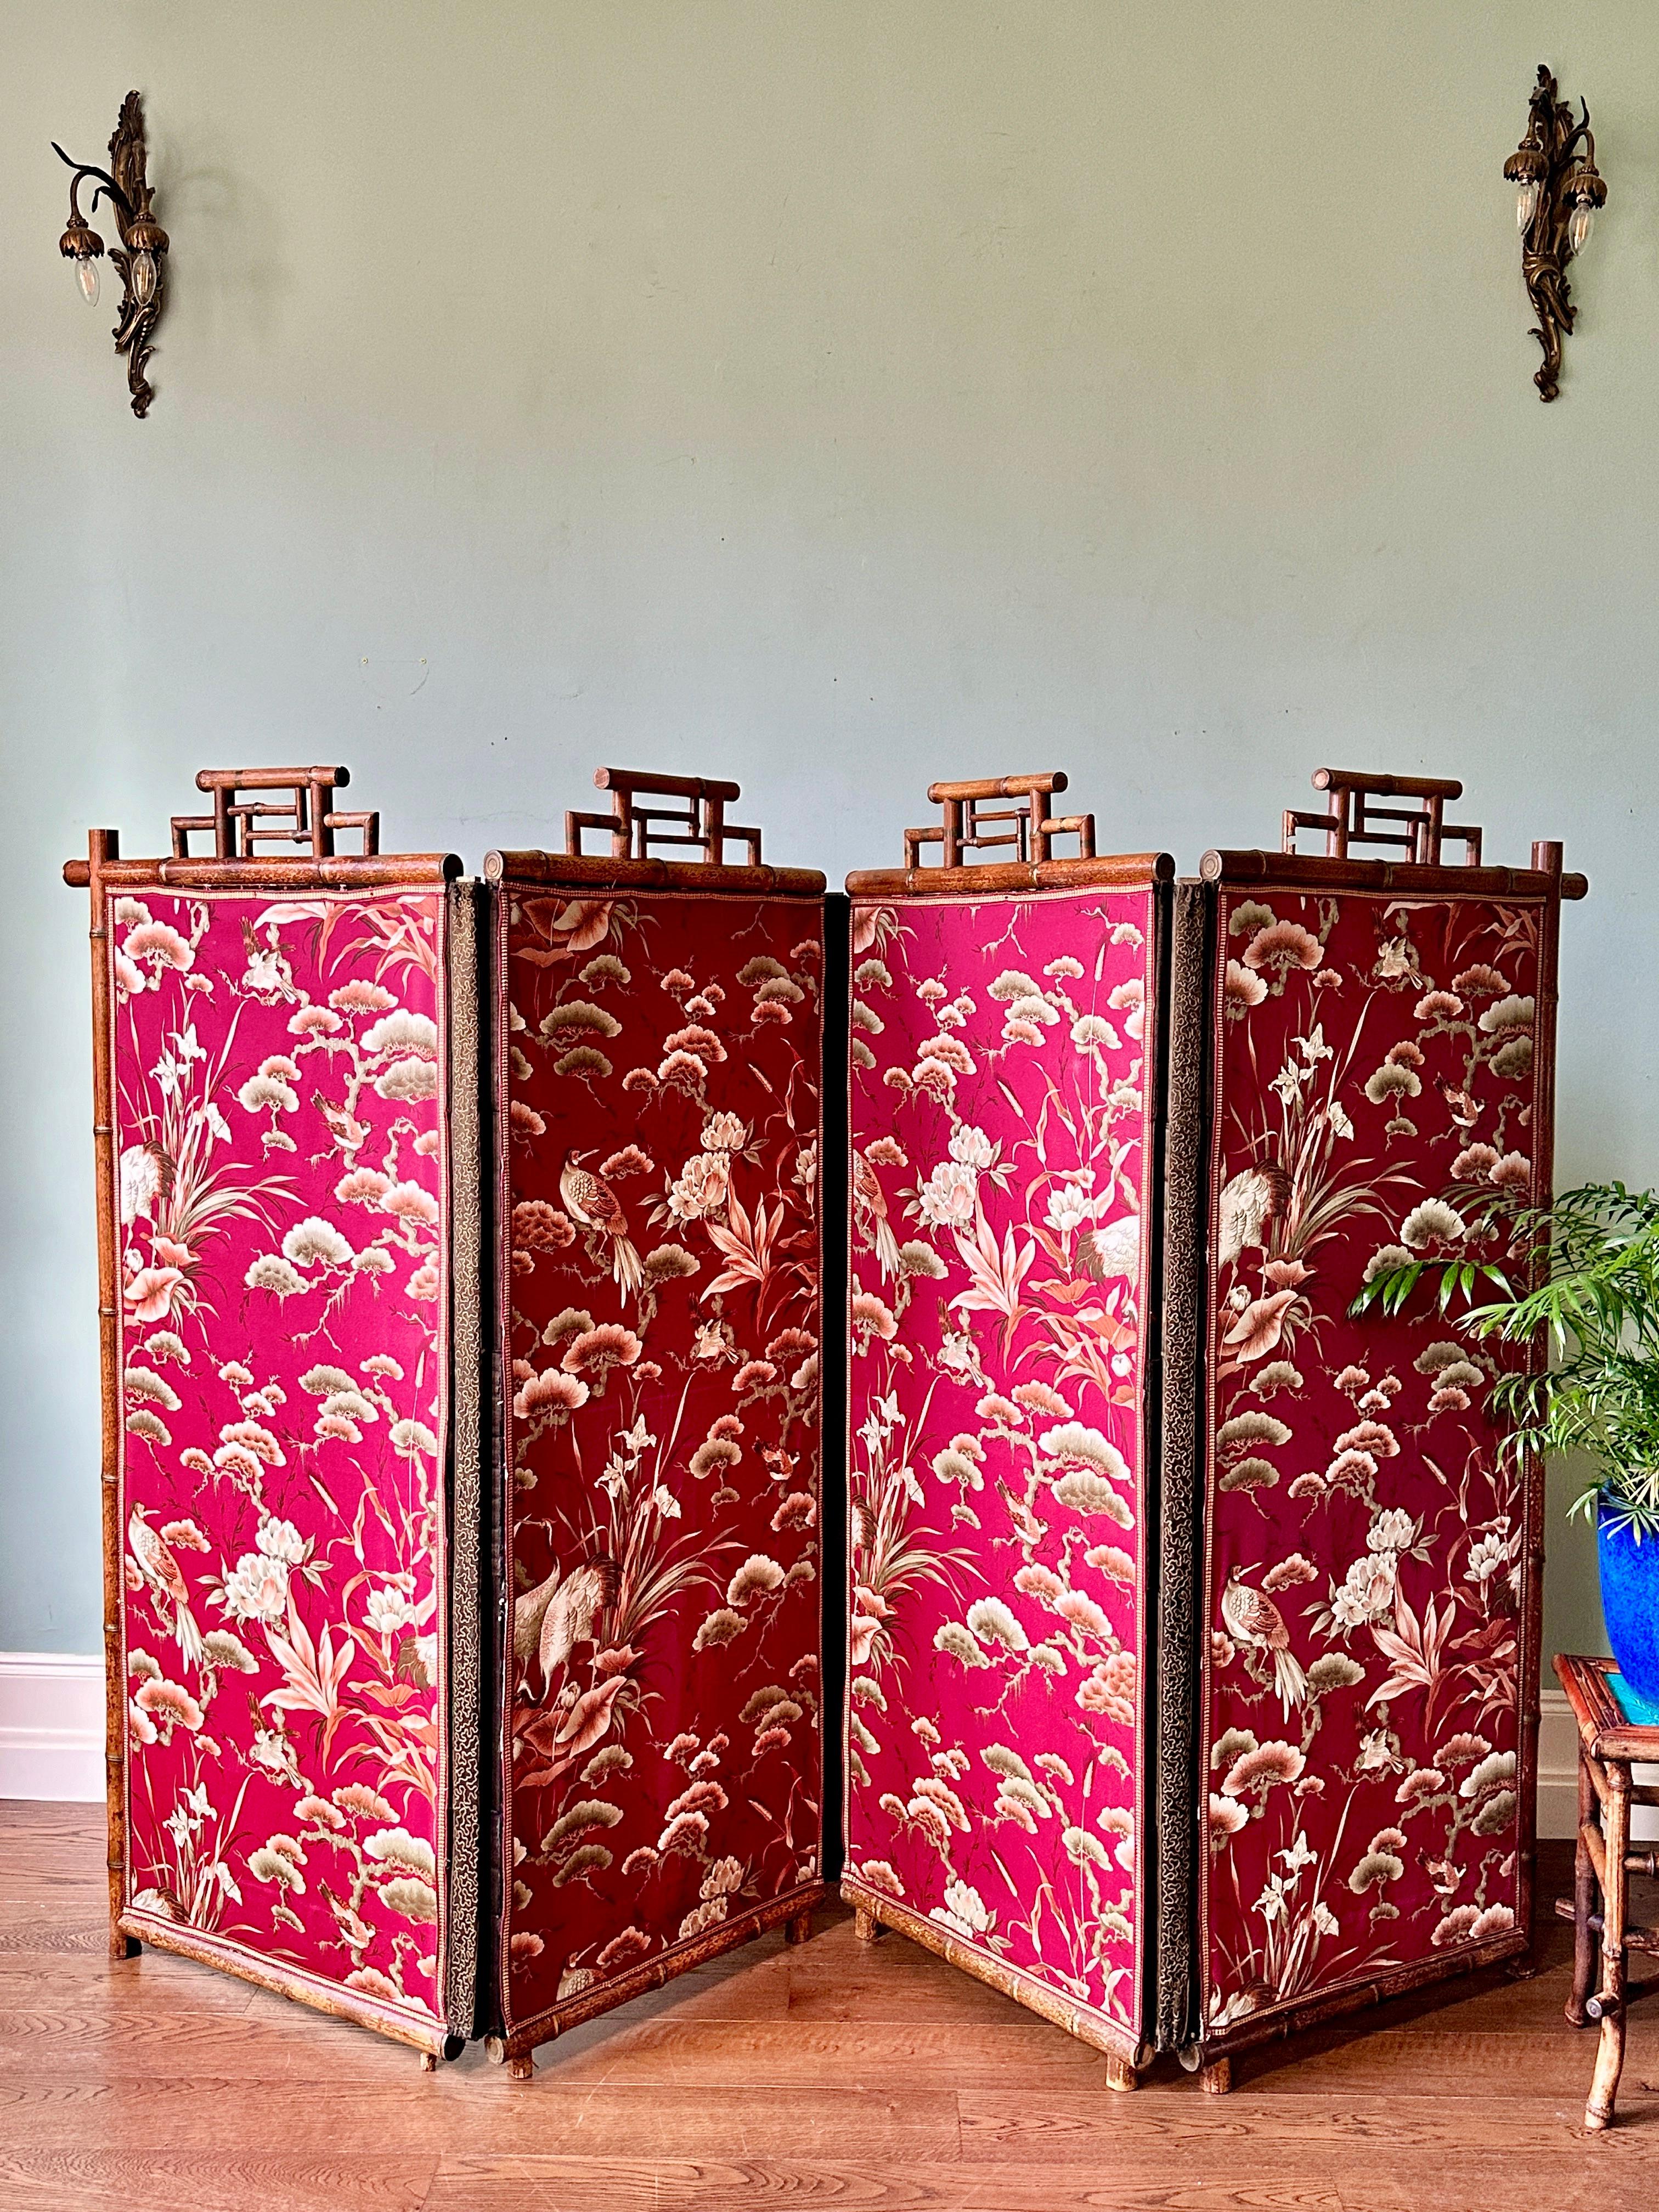 Large C19th Japanese silk and bamboo screen.

A truly superb four-fold room divider with silk panels depicting a forest scene with birds and flowers. Each panel features a bamboo crown with faded gilt details, embroidered edging and decorative,